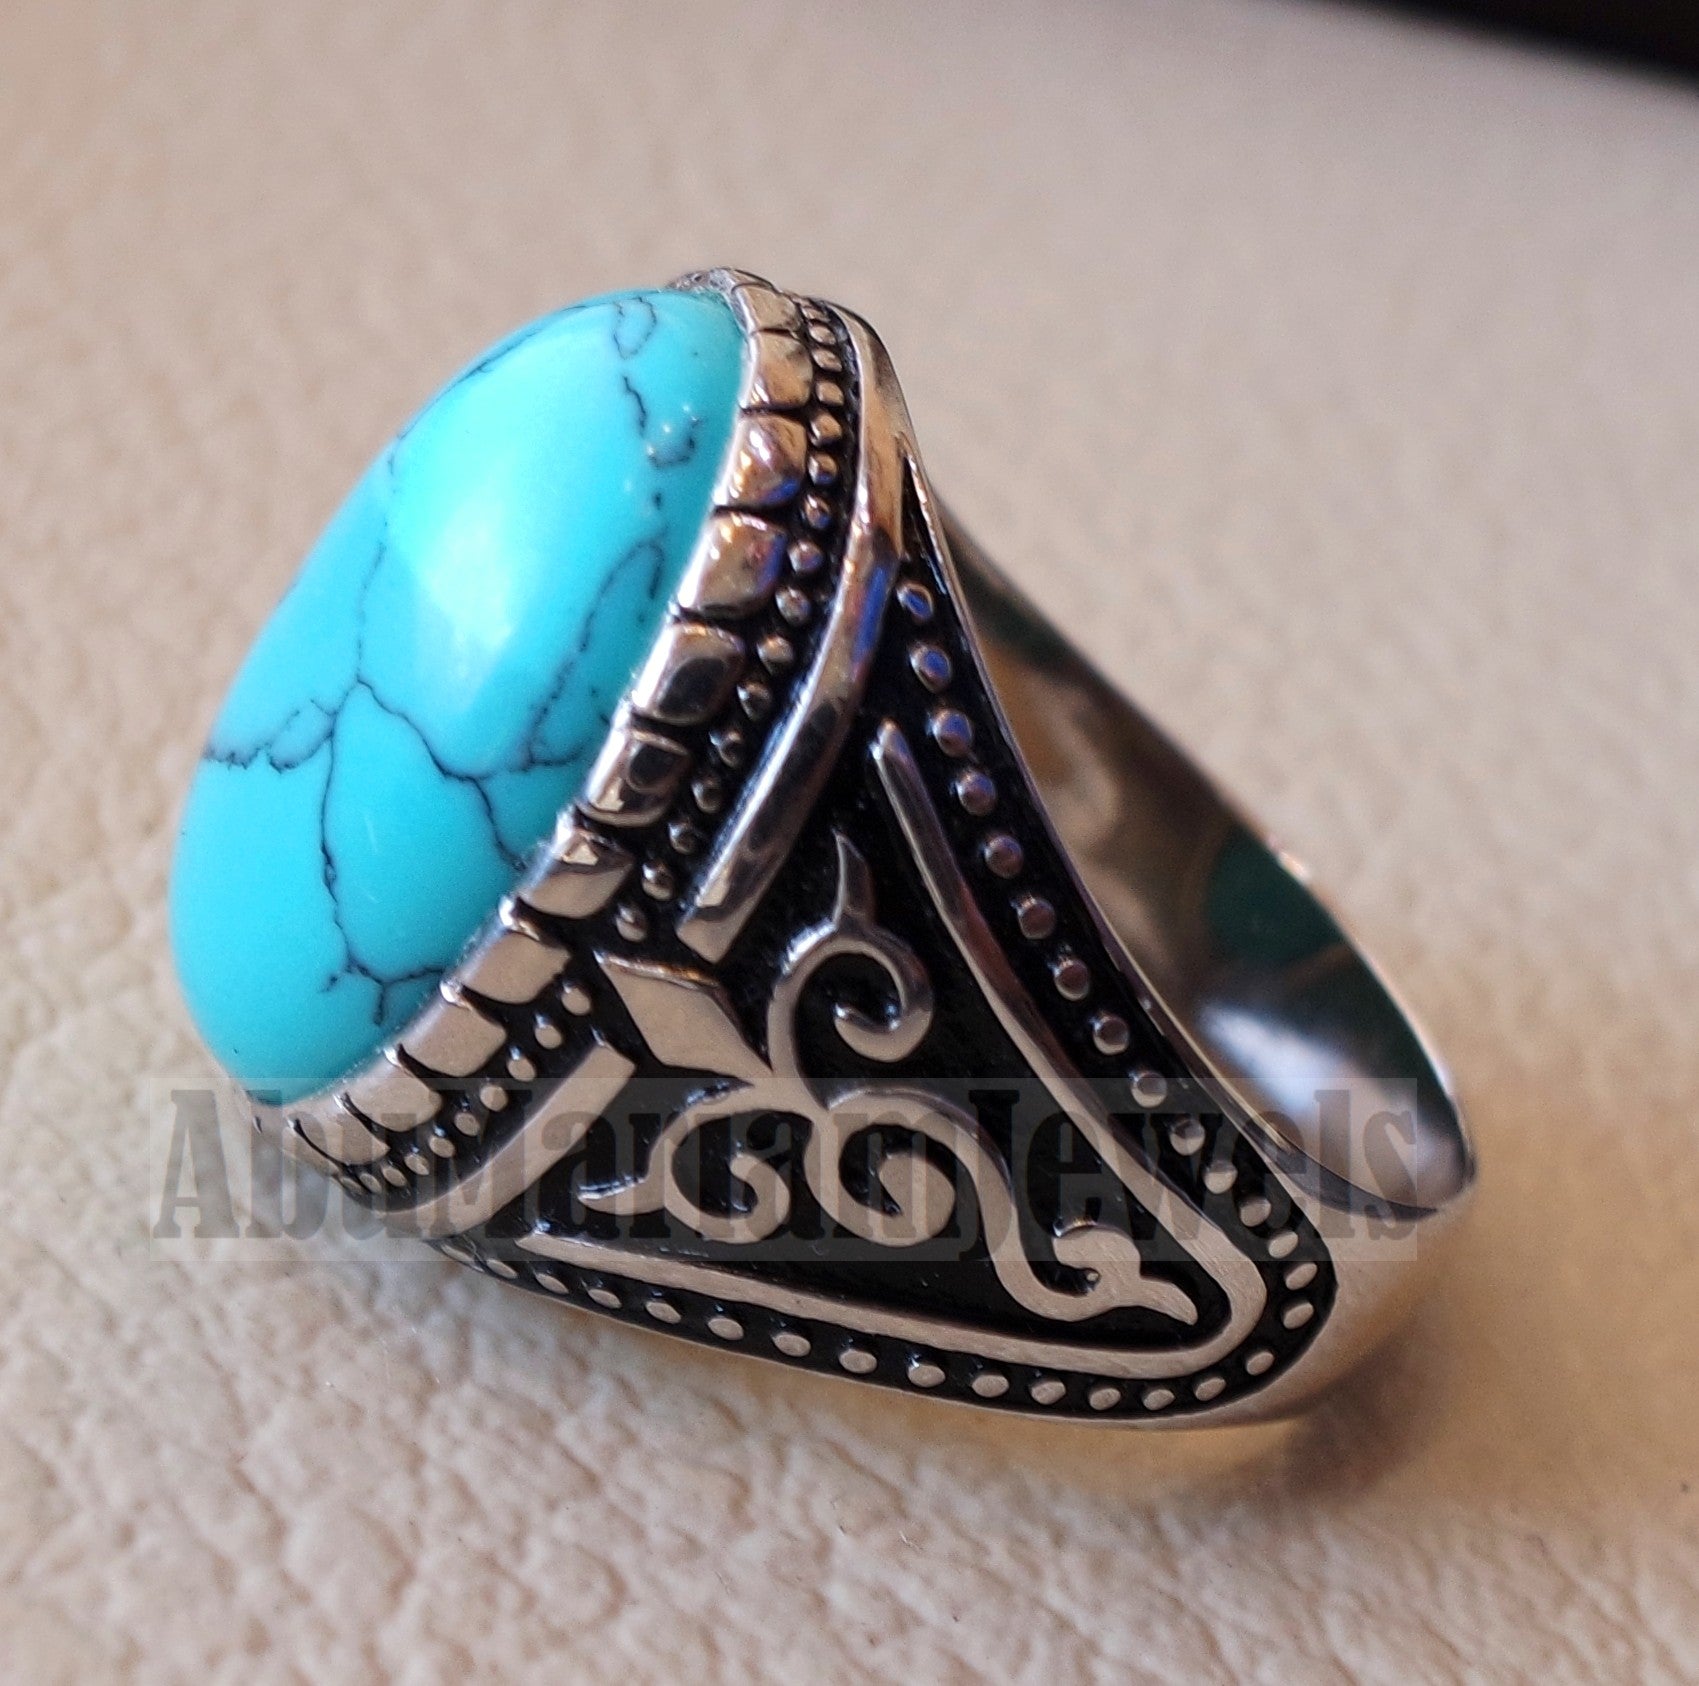 blue turquoise cabochon stone sterling silver 925 men ring vintage ottoman style jewelry oval imitation stone all sizes fast shipping